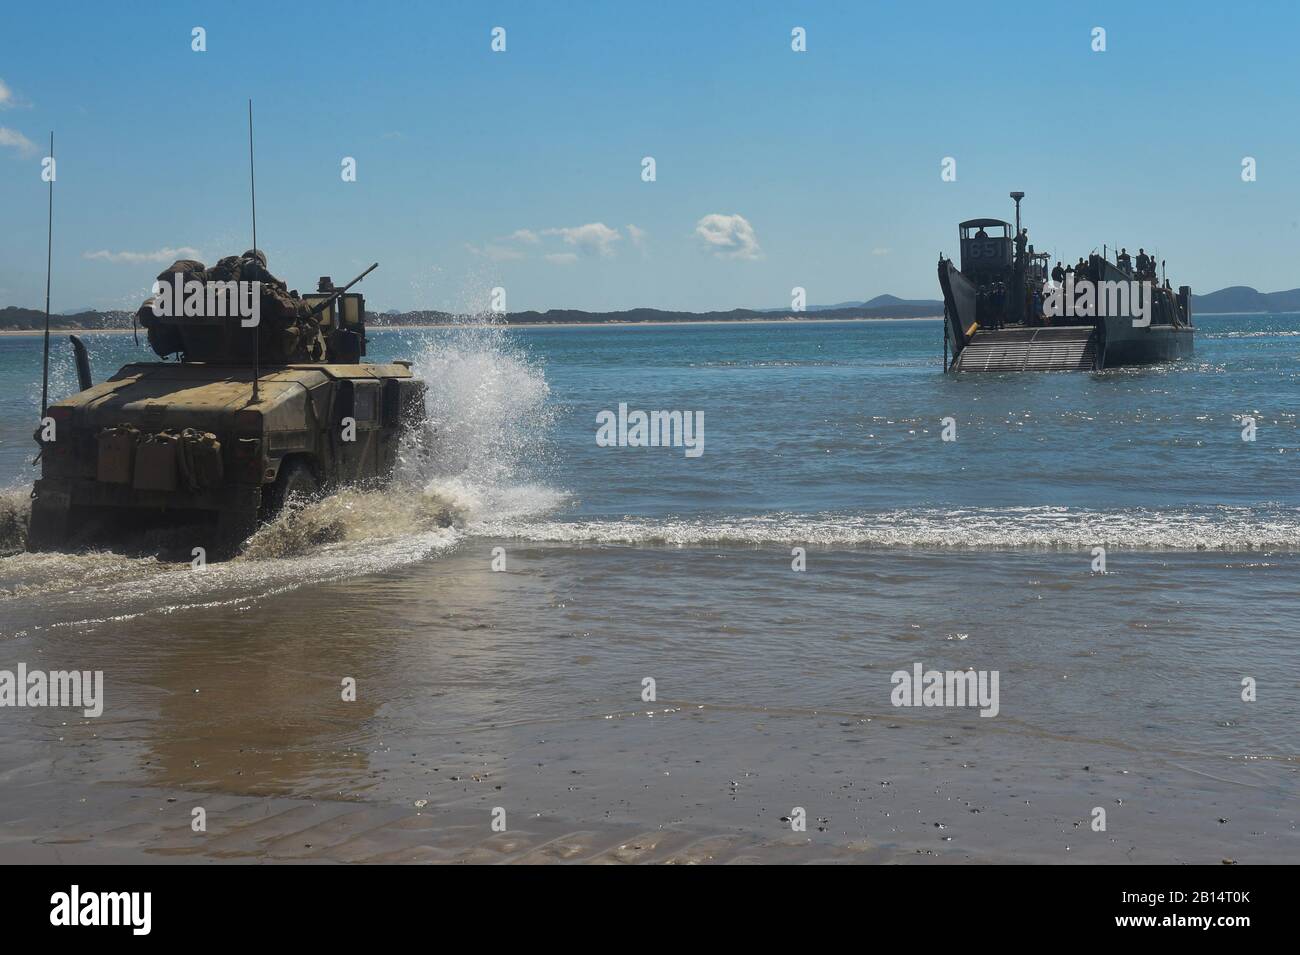 A U.S. Marine Corps Humvee enters the beach to board a Landing Craft Utility (LCU) 1651 in order to transfer personnel and equipment to the amphibious dock landing ship USS Ashland (LSD 48) after completion of certification exercise (CERTEX) in the Coral Sea, August 18, 2017. The Ashland, part of the Bonhomme Richard Expeditionary Strike Group (BHR ESG), and the 31st Marine Expeditionary Unit (MEU), participated in CERTEX to increase joint capability to respond to a number of potential contingencies. CERTEX was conducted to evaluate the integration of all elements of the BHR ESG testing their Stock Photo